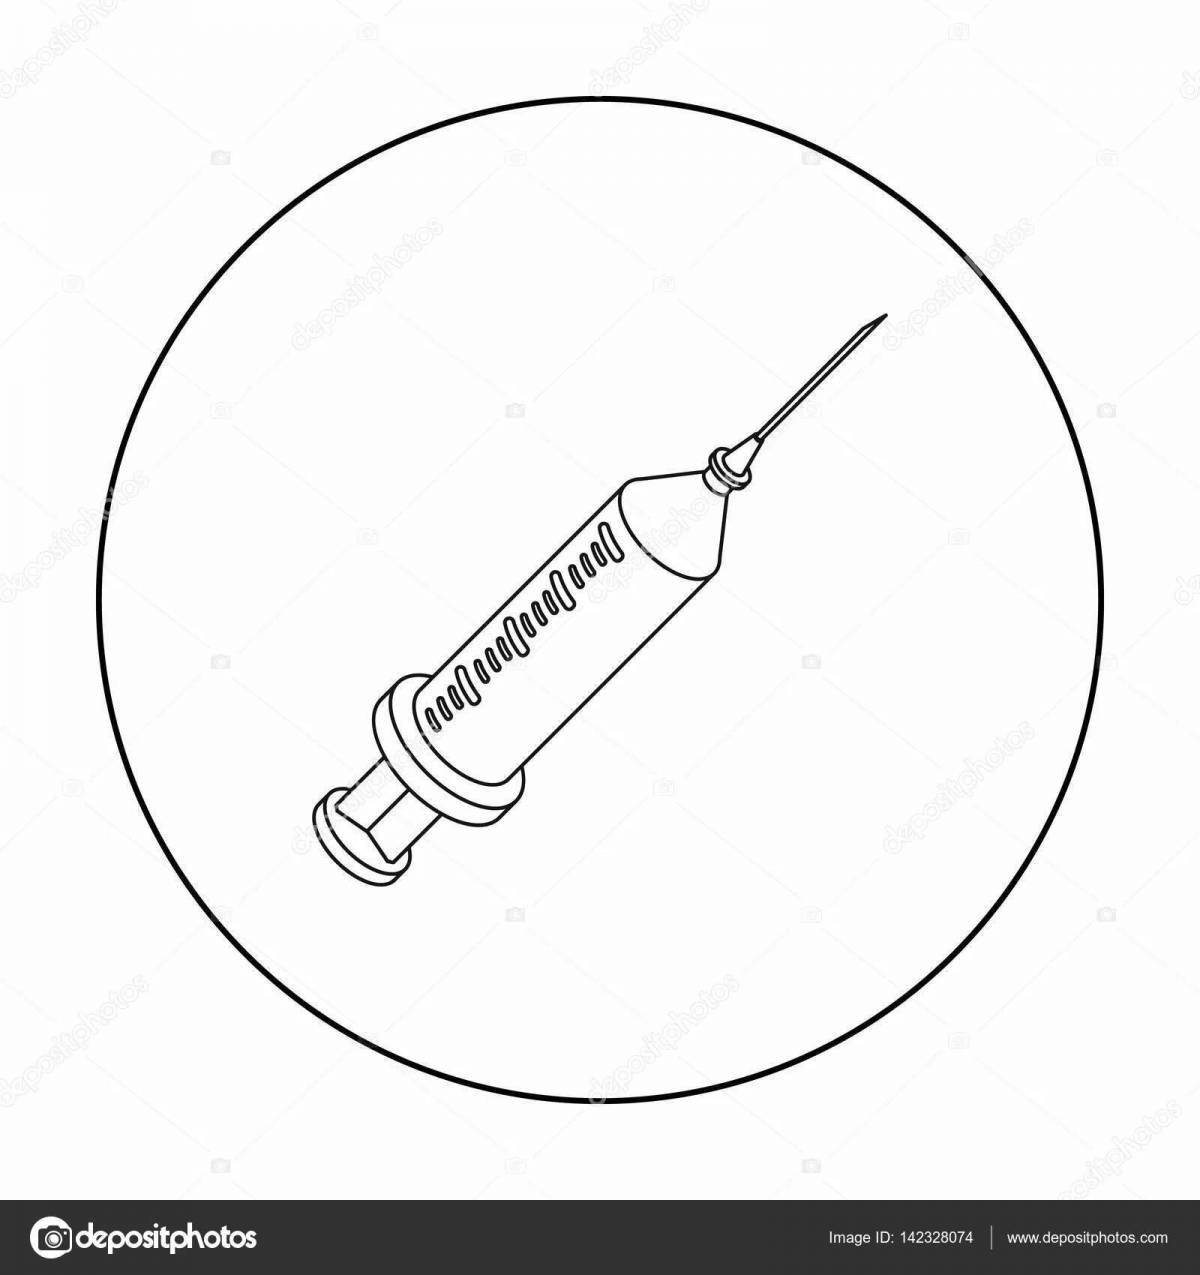 Exciting syringe coloring page for kids